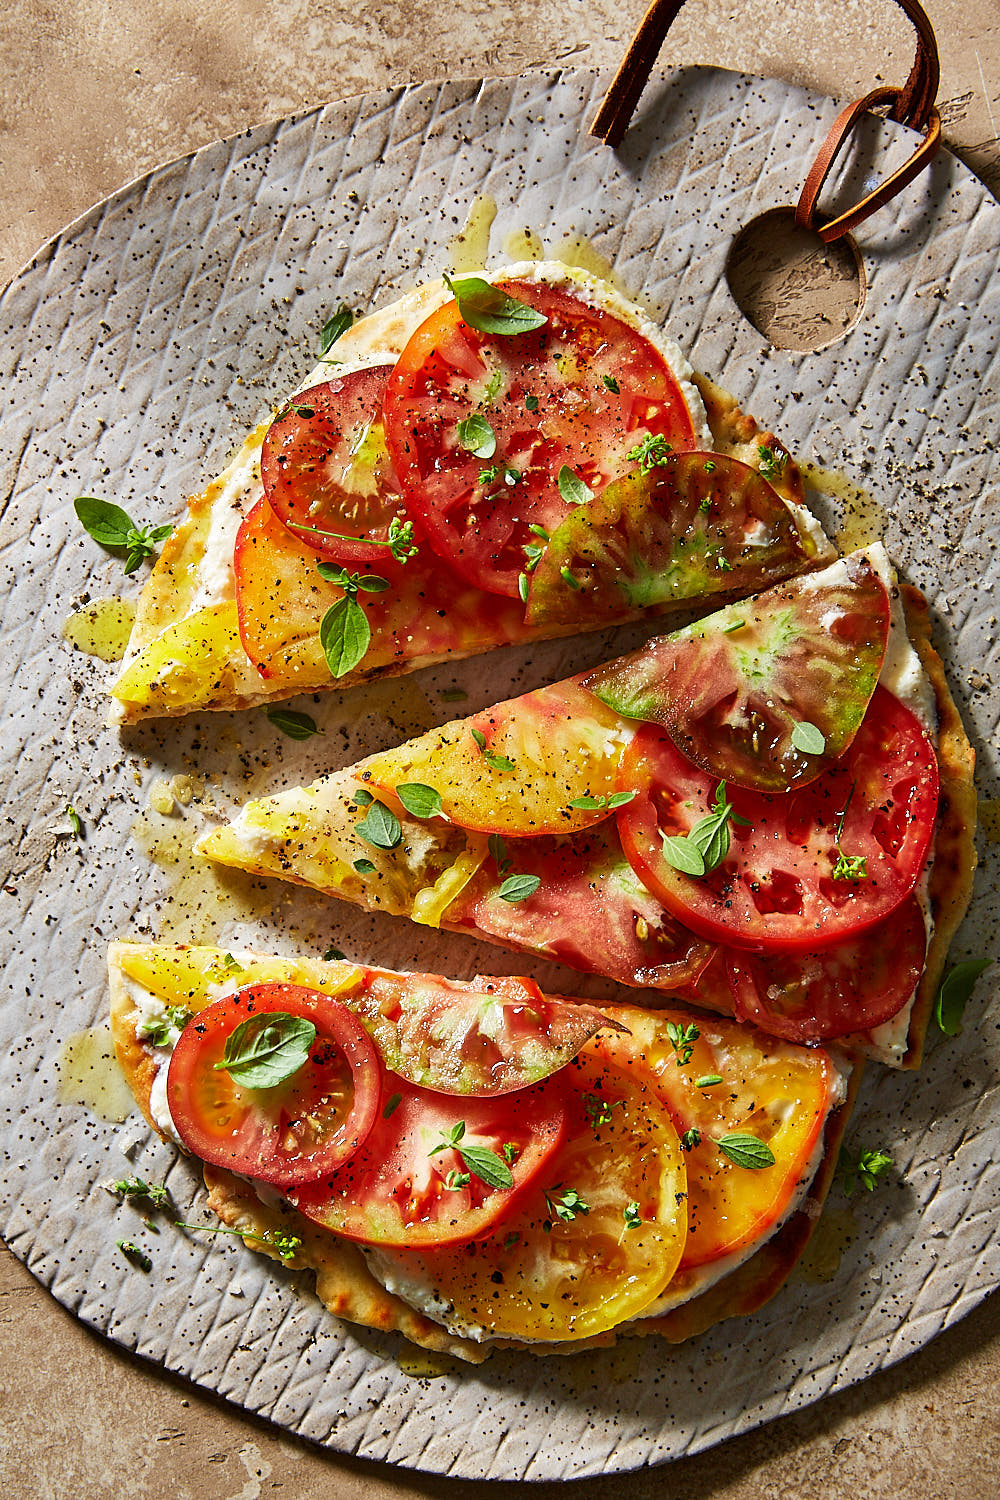 Flatbread with tomatoes and herbs